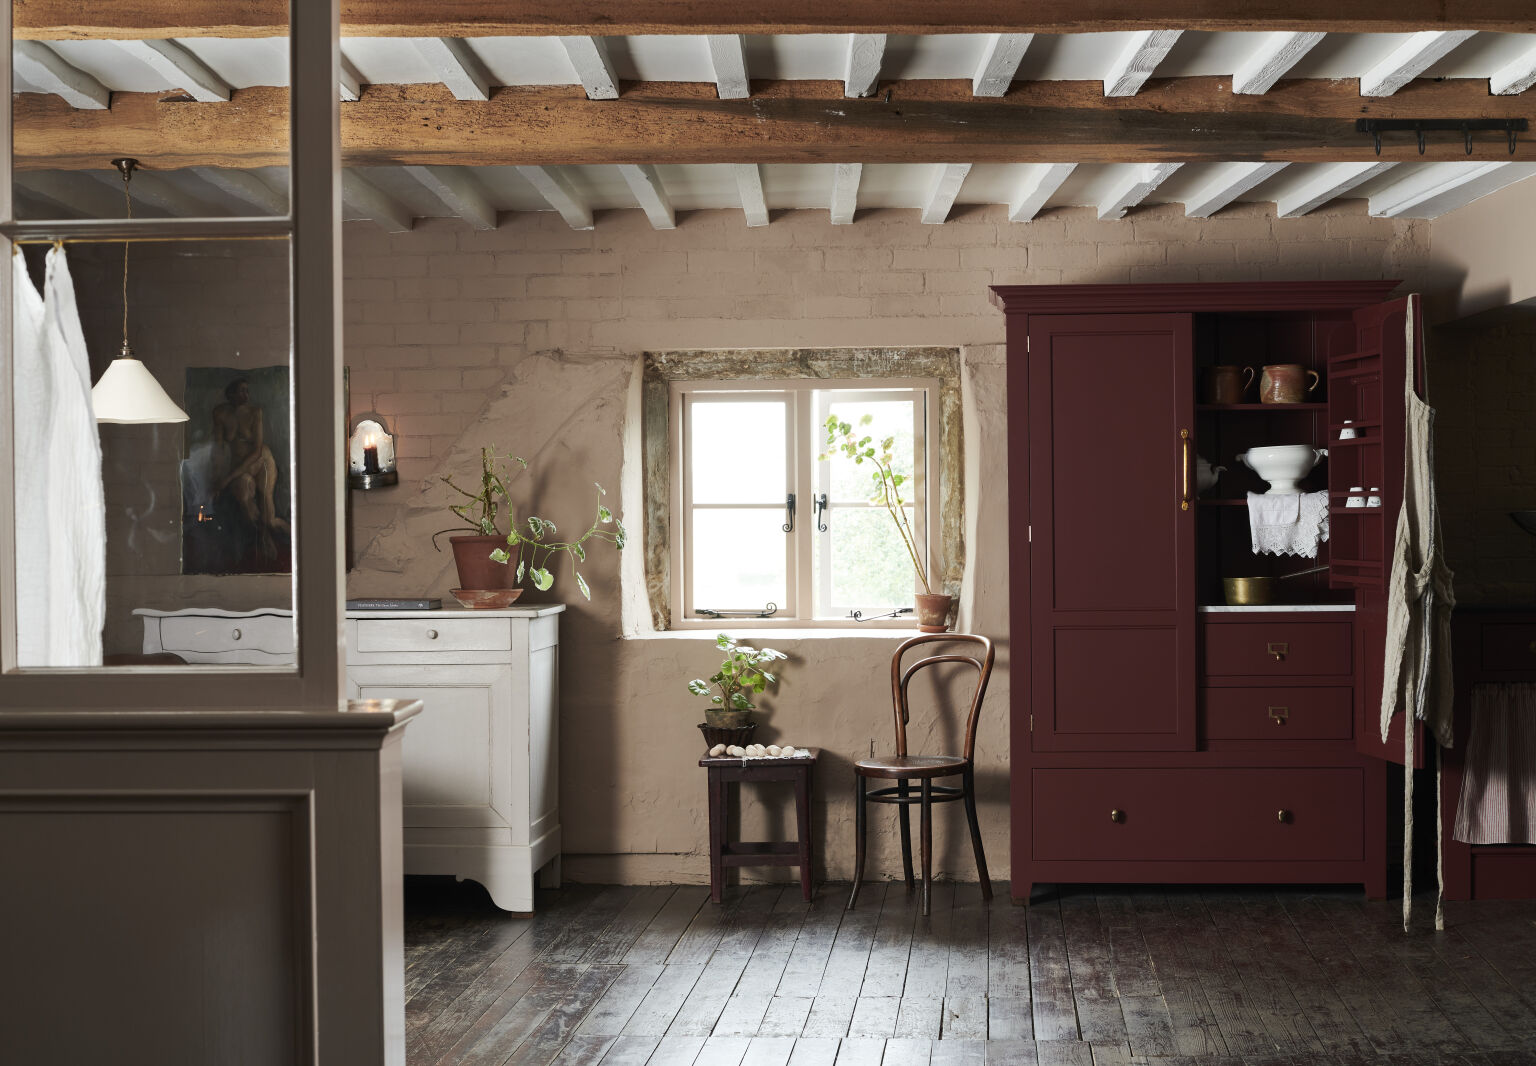 Kitchen of the Week: Burgundy Meets Blush in the English Countryside